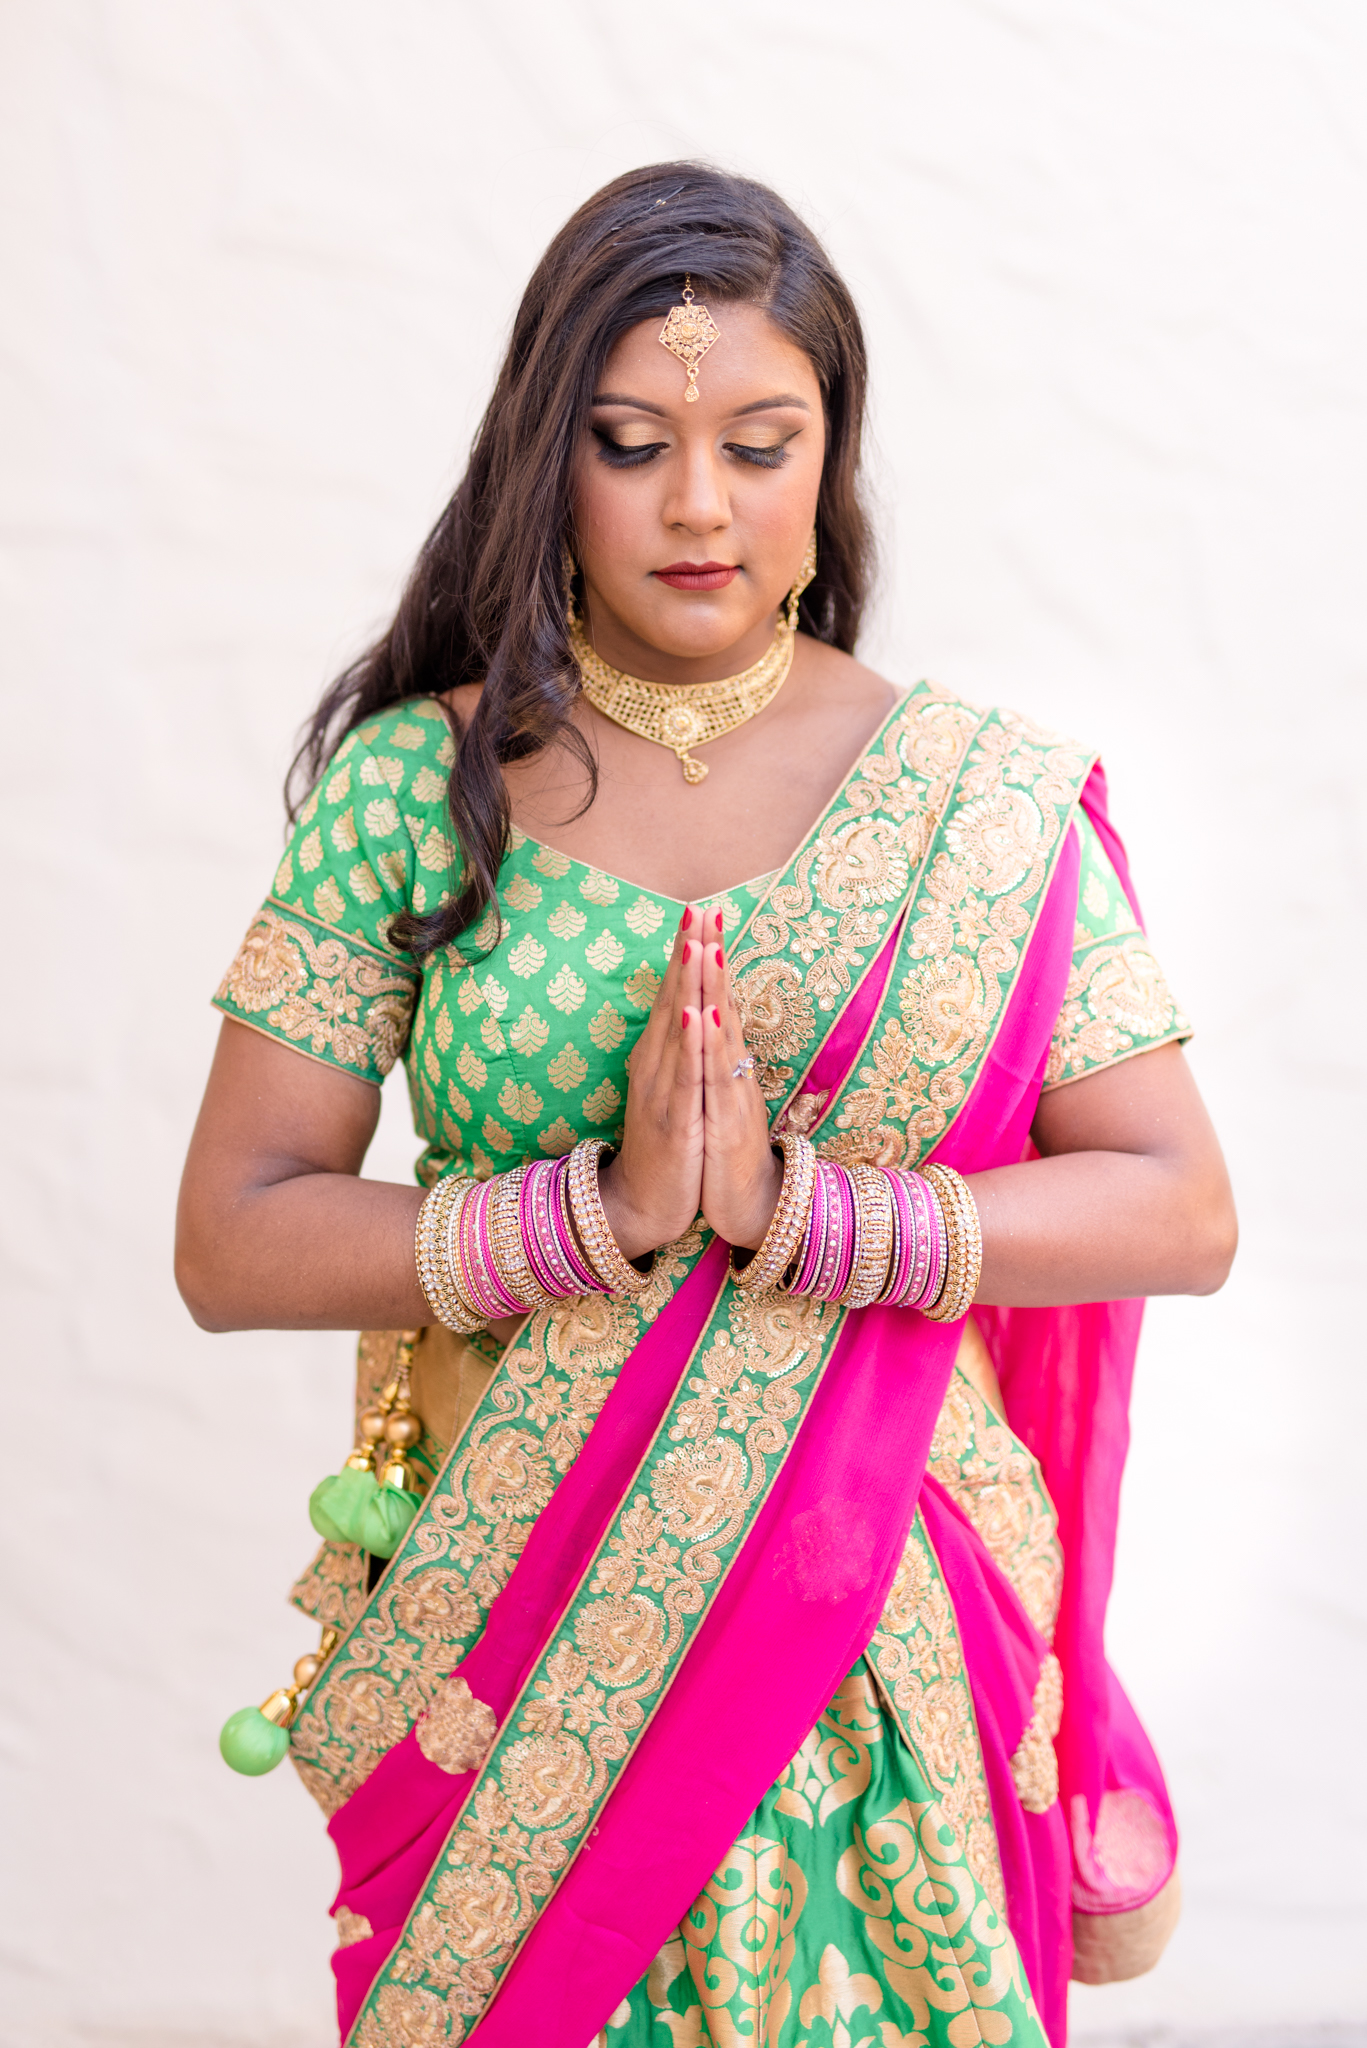 Engaged woman in traditional Indian attire.